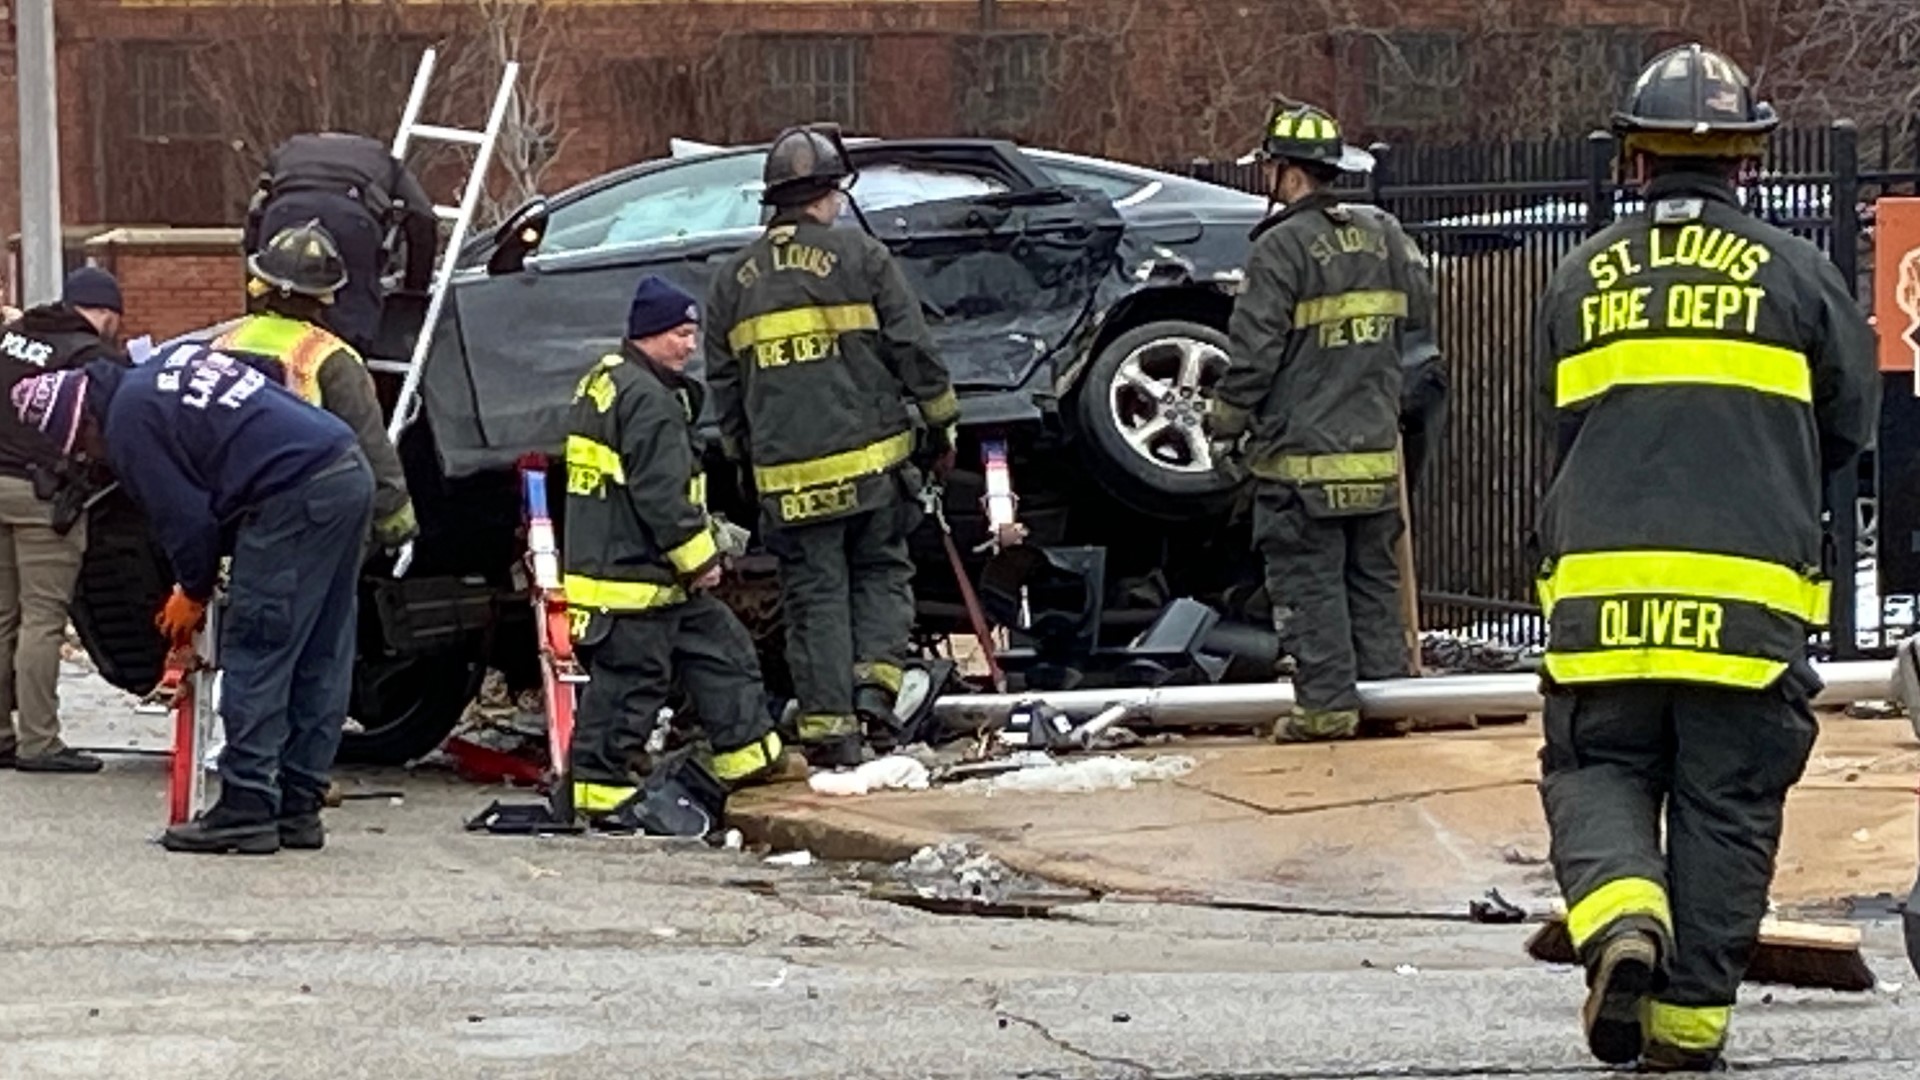 St. Louis police responded to North 20th Street and Delmar Boulevard shortly before 3 p.m. Wednesday for a crash involving two carjacked vehicles.